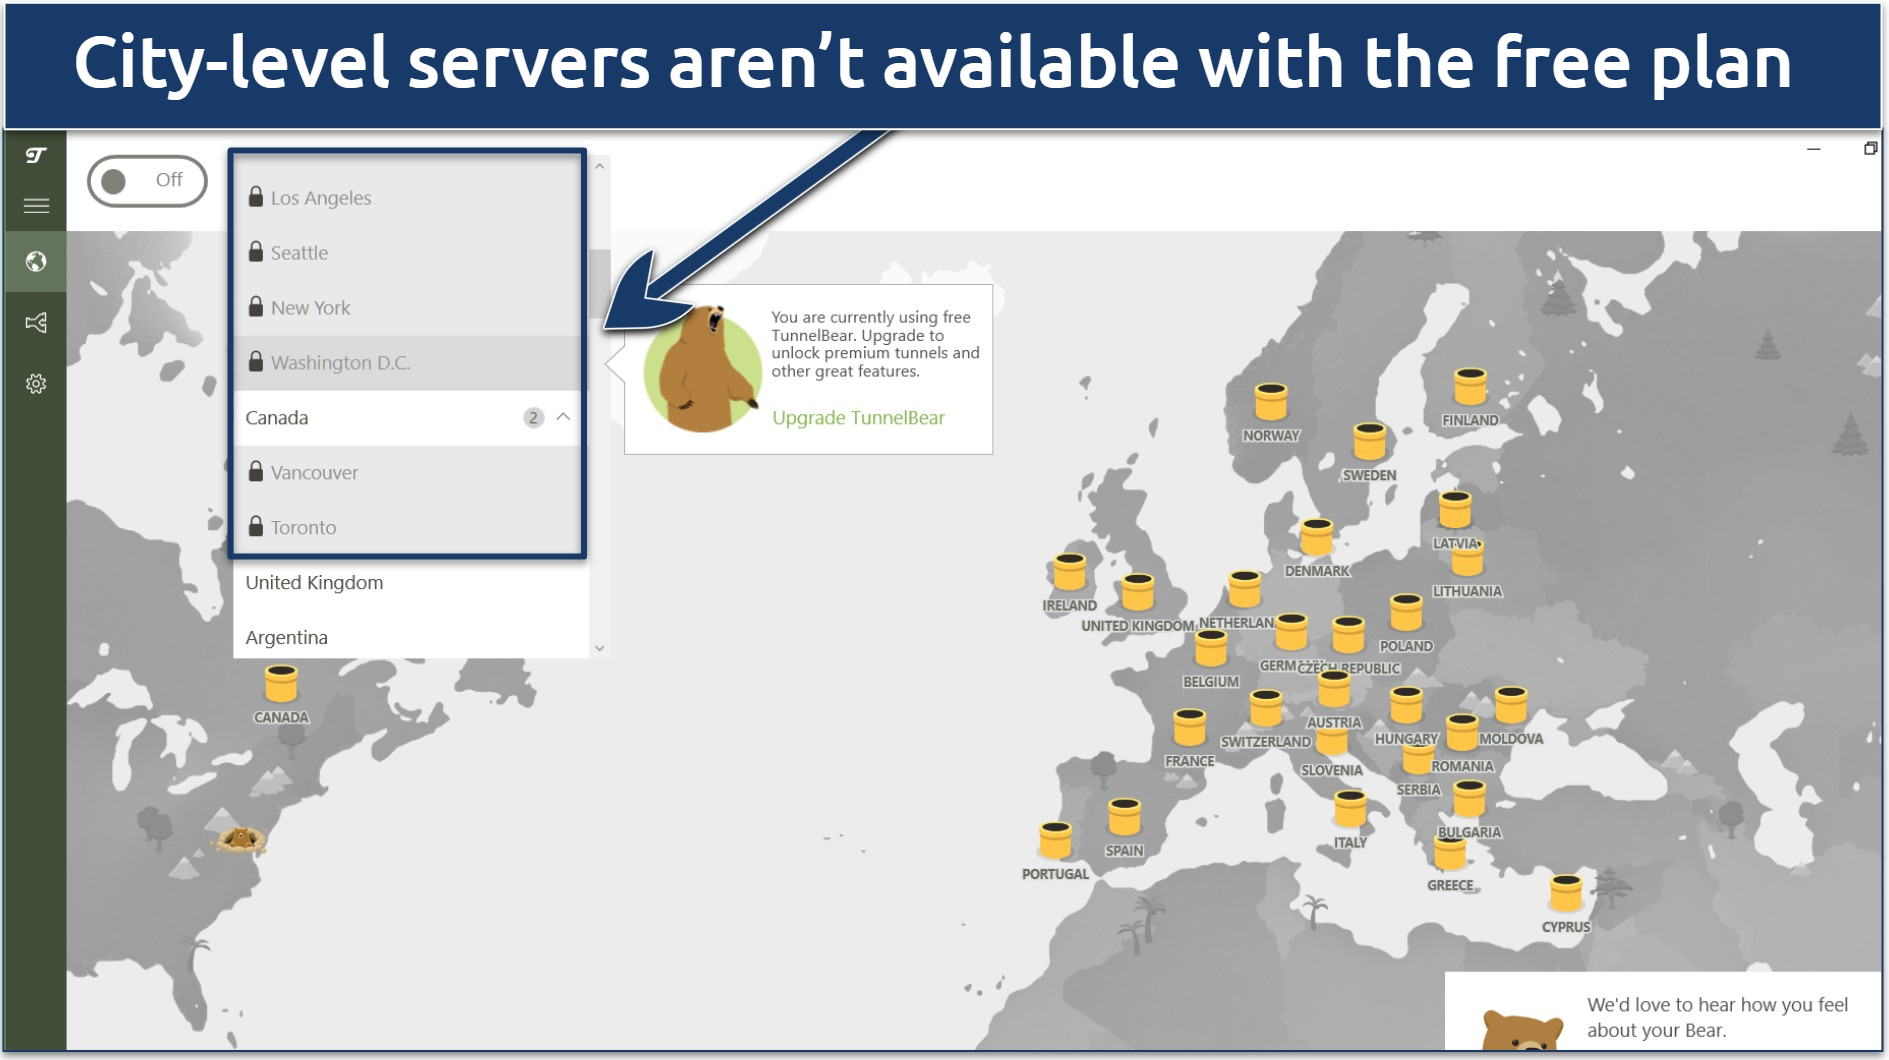 A screenshot showing city-level servers aren't available with TunnelBear's free plan